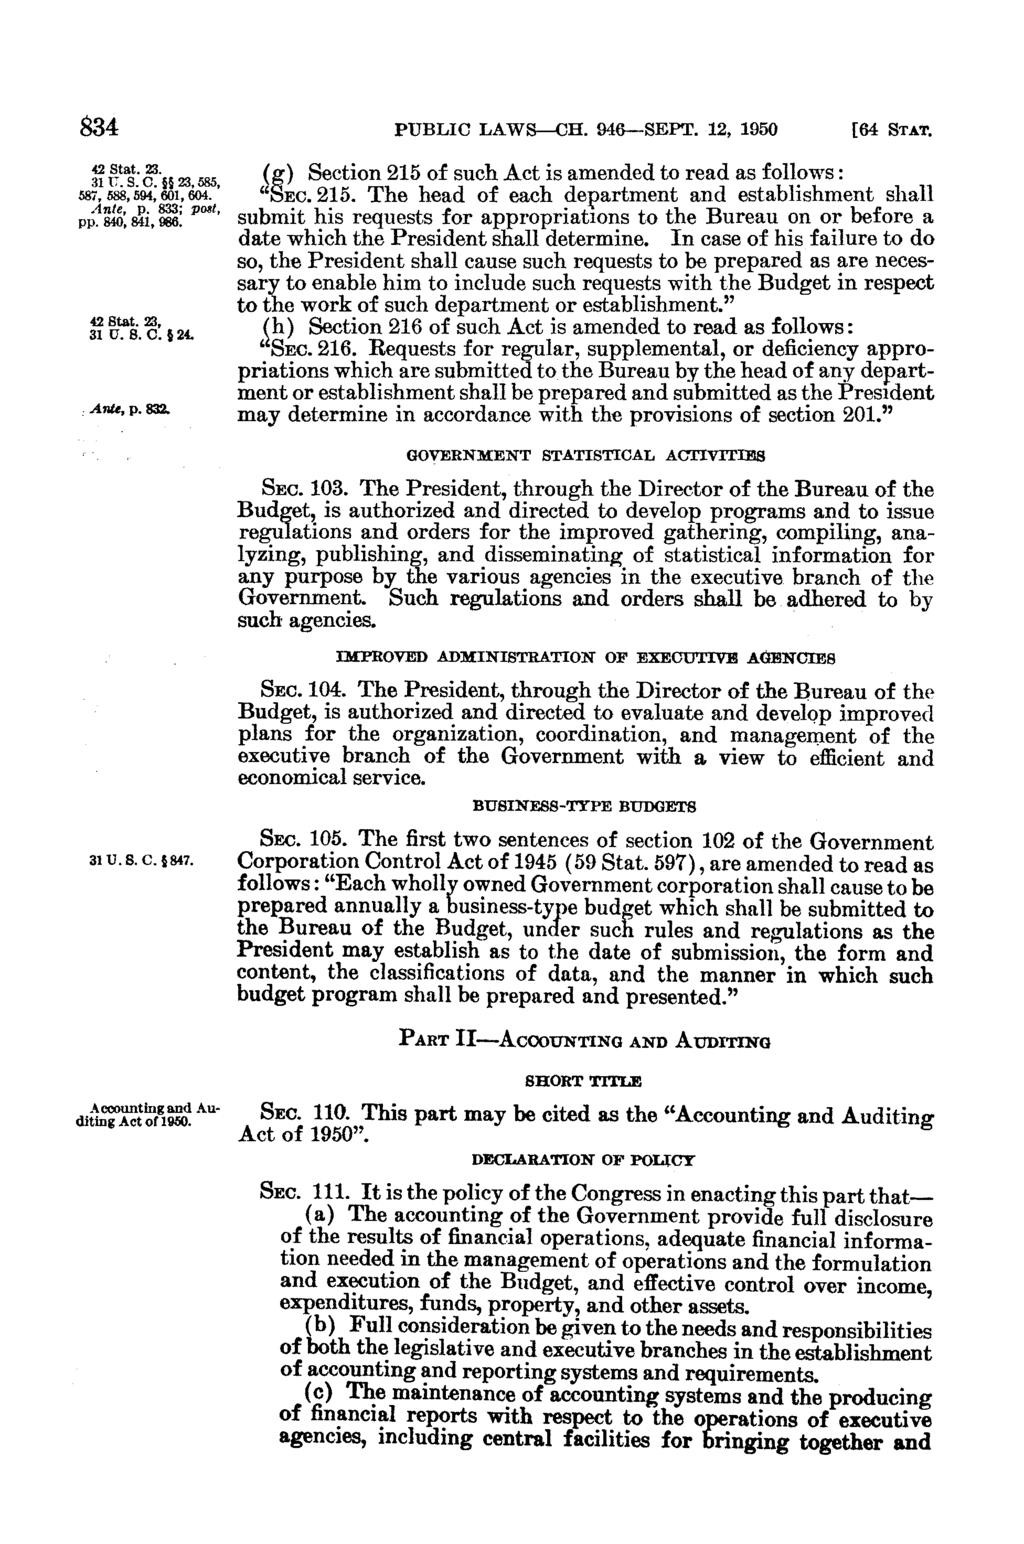 834 PUBLIC LAWS-CH. 946-SEPT. 12, 1950 [64 STAT. 42 Sta. C 23585 (g) Section 215 of such Act is amended to read as follows: 587, 5, 594 01, 604,. "SEC. 215. The head of each department and establishment shall p t pp.